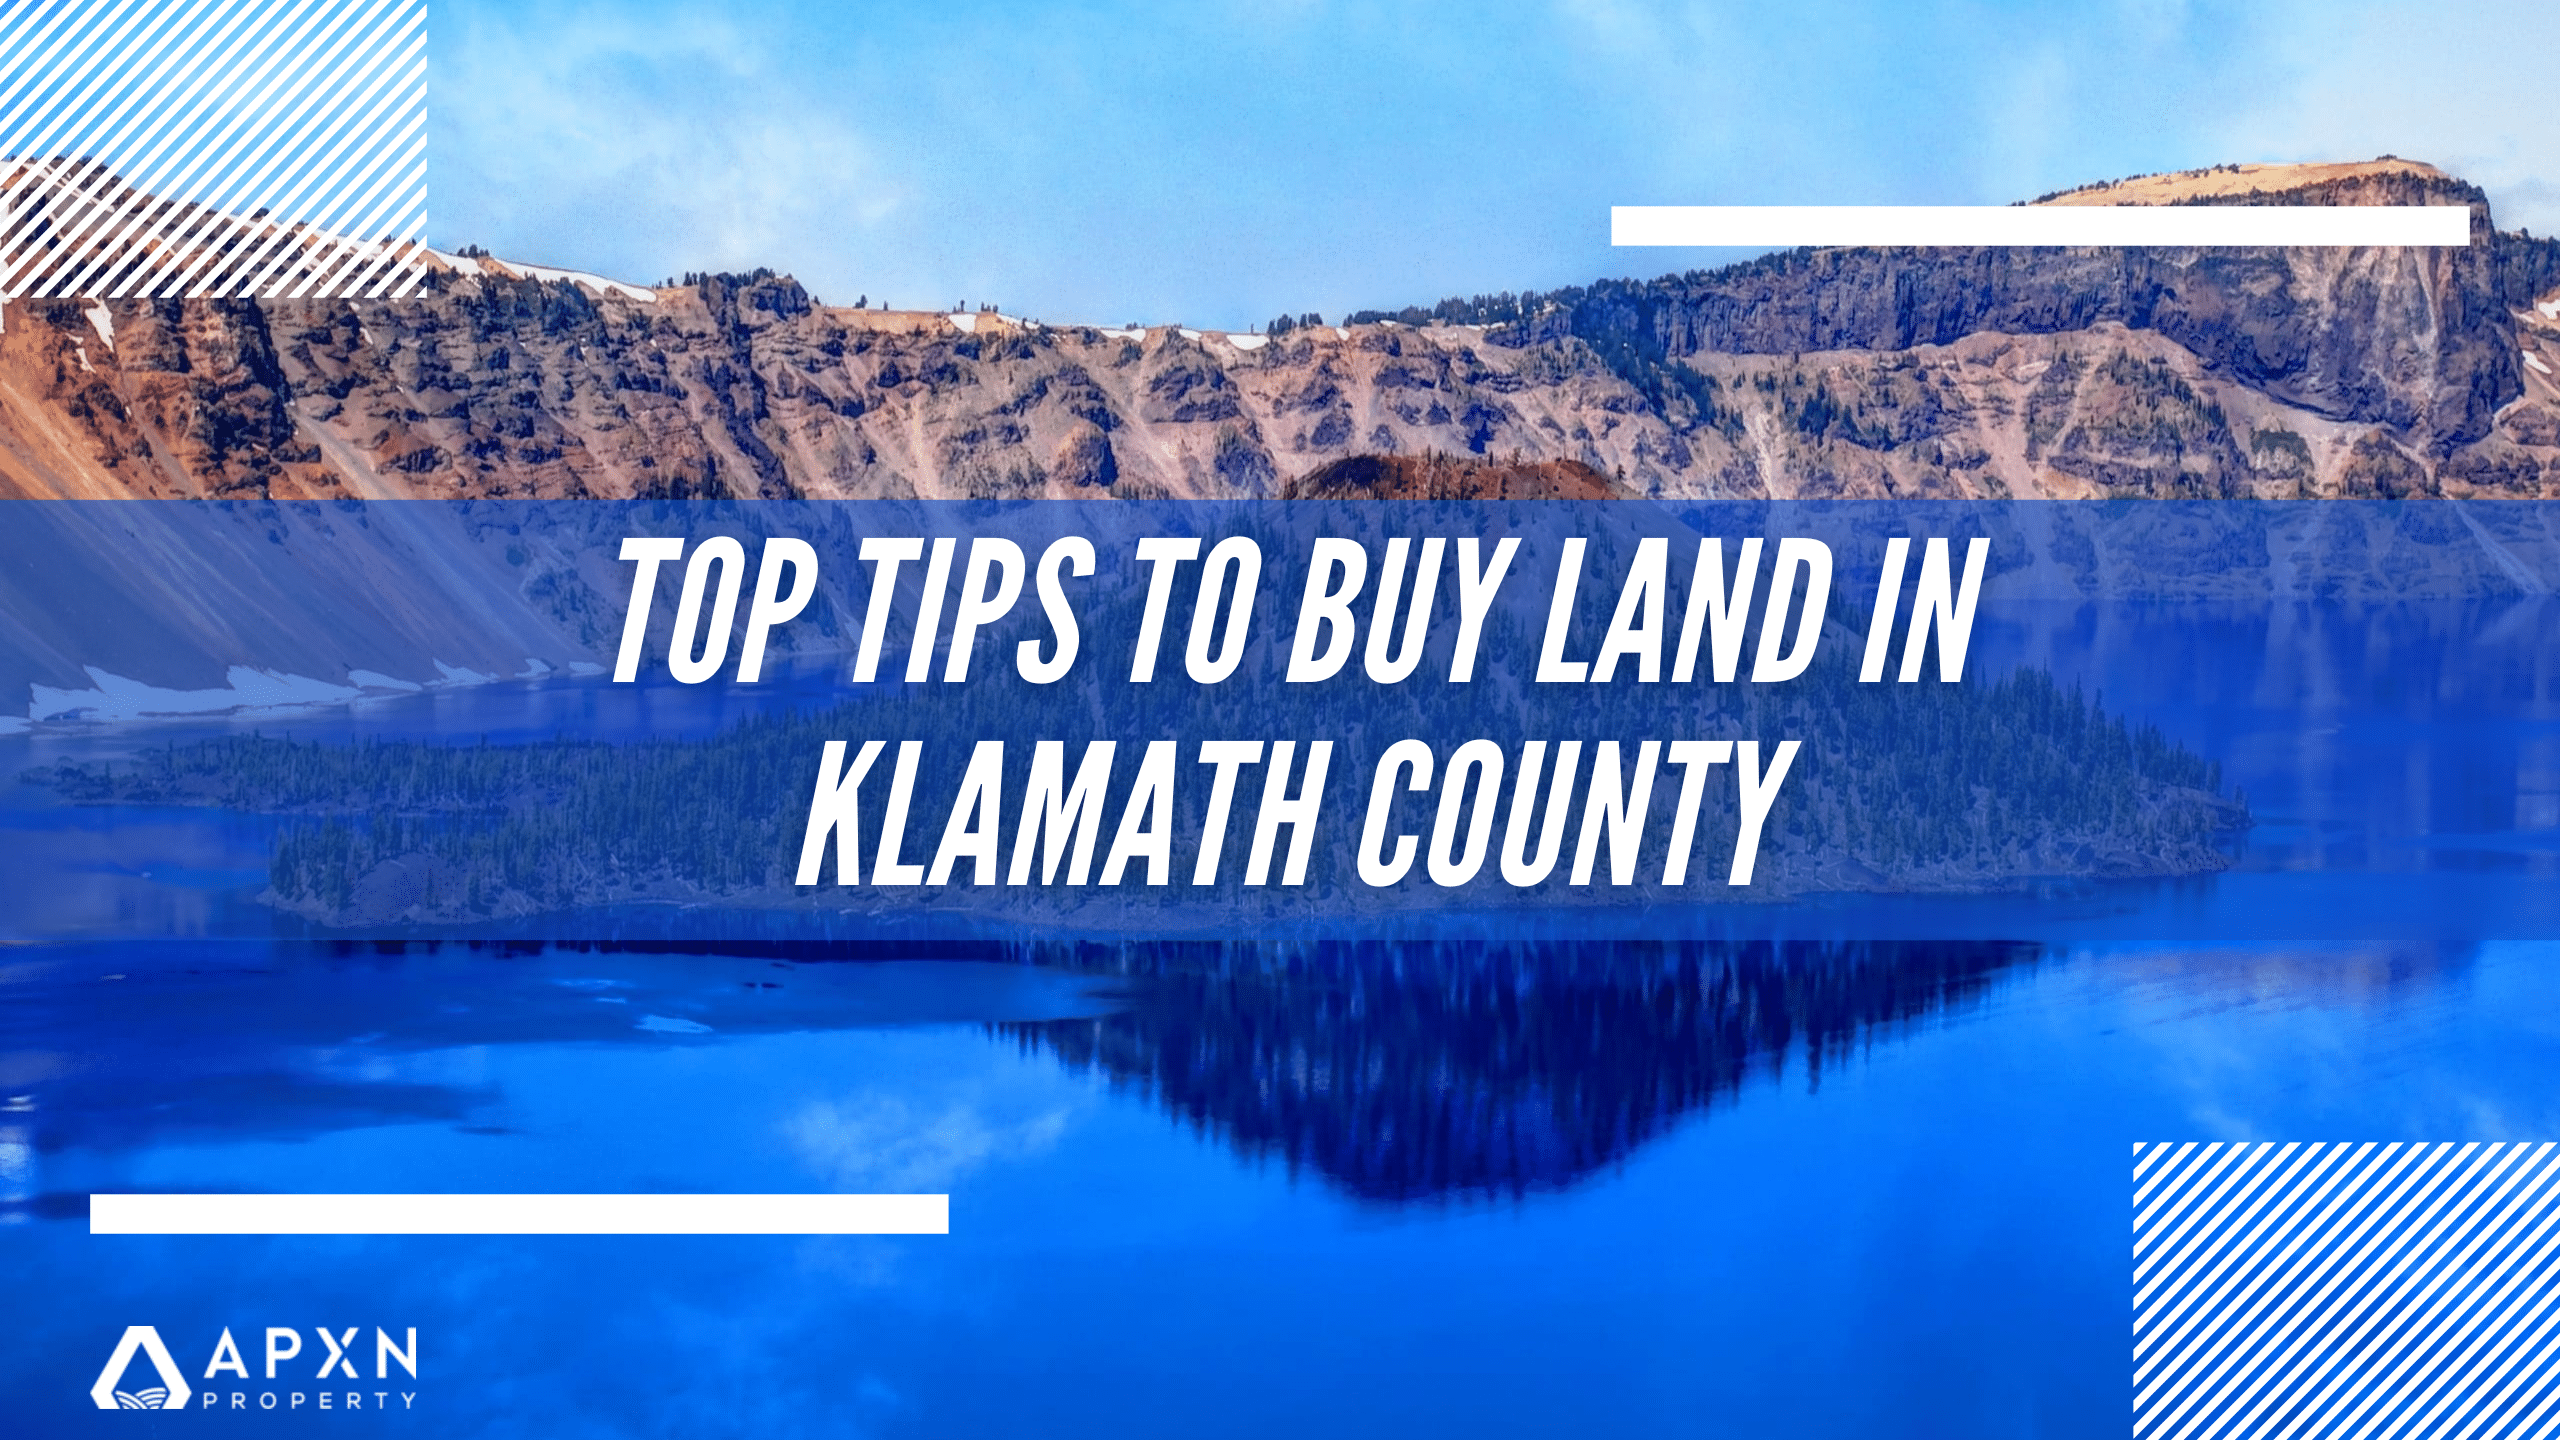 Top Tips to Buy Land in Klamath County, OR